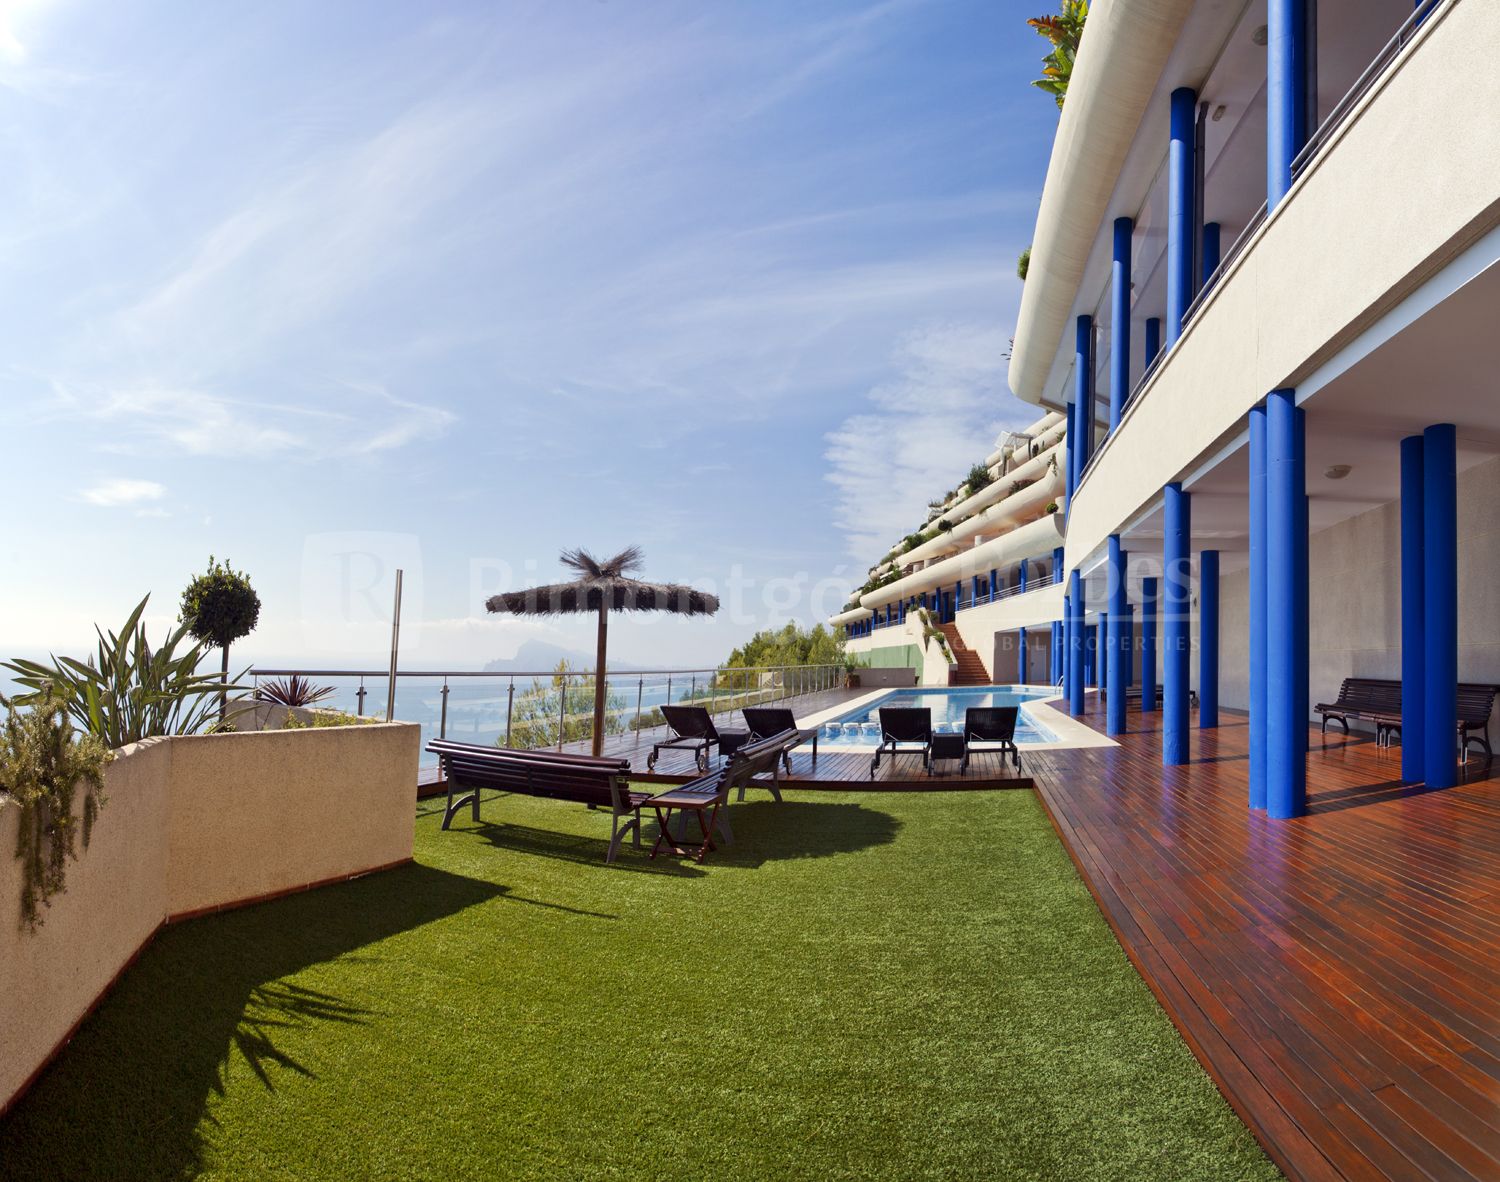 Luxury apartment with views of the Mediterranean in Altea, Alicante.